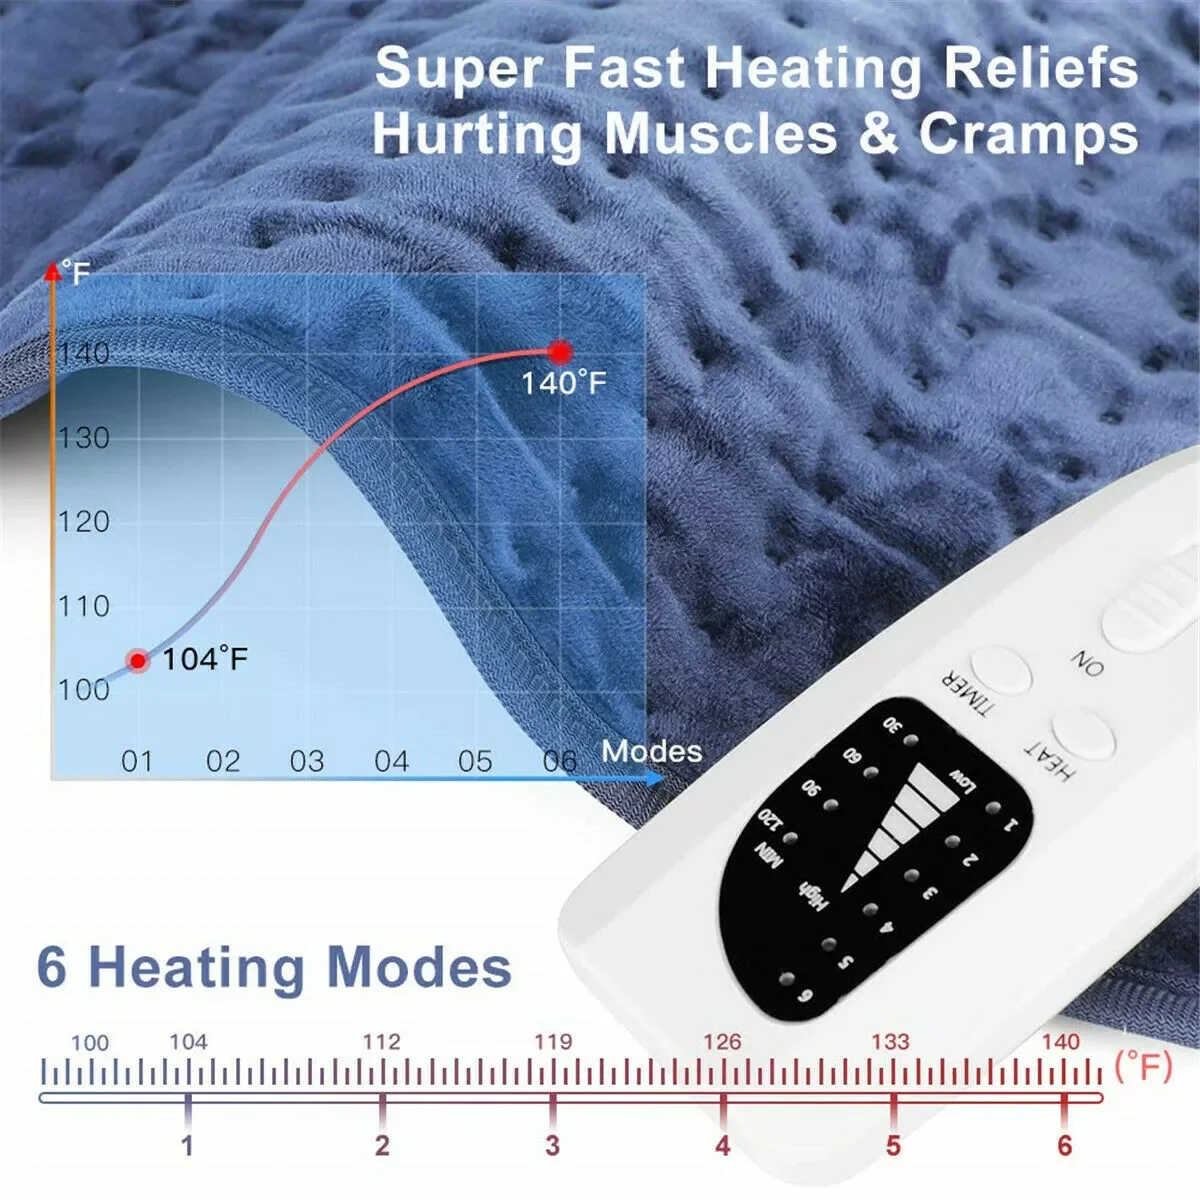 Electric Blankets Heating Pad Abdomen Waist Back Pain Relief Winter Warmer Heat Controller for Shoulder Neck Spine images - 6